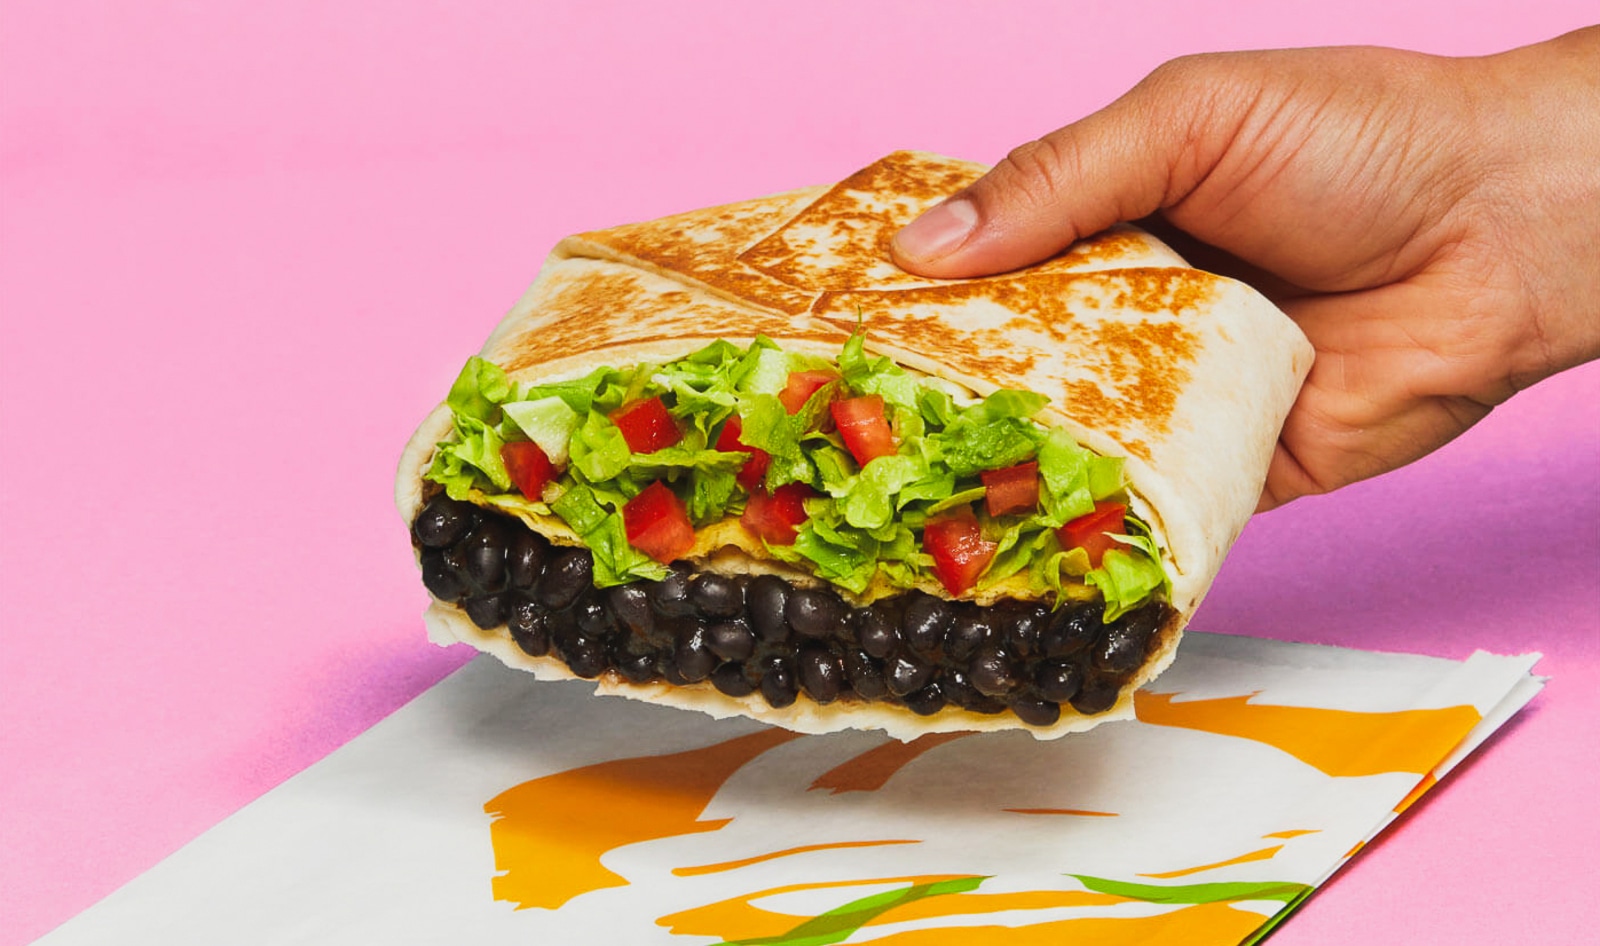 Can Eating at Taco Bell Give You Glowing Skin? Study Uncovers New Bean Benefits